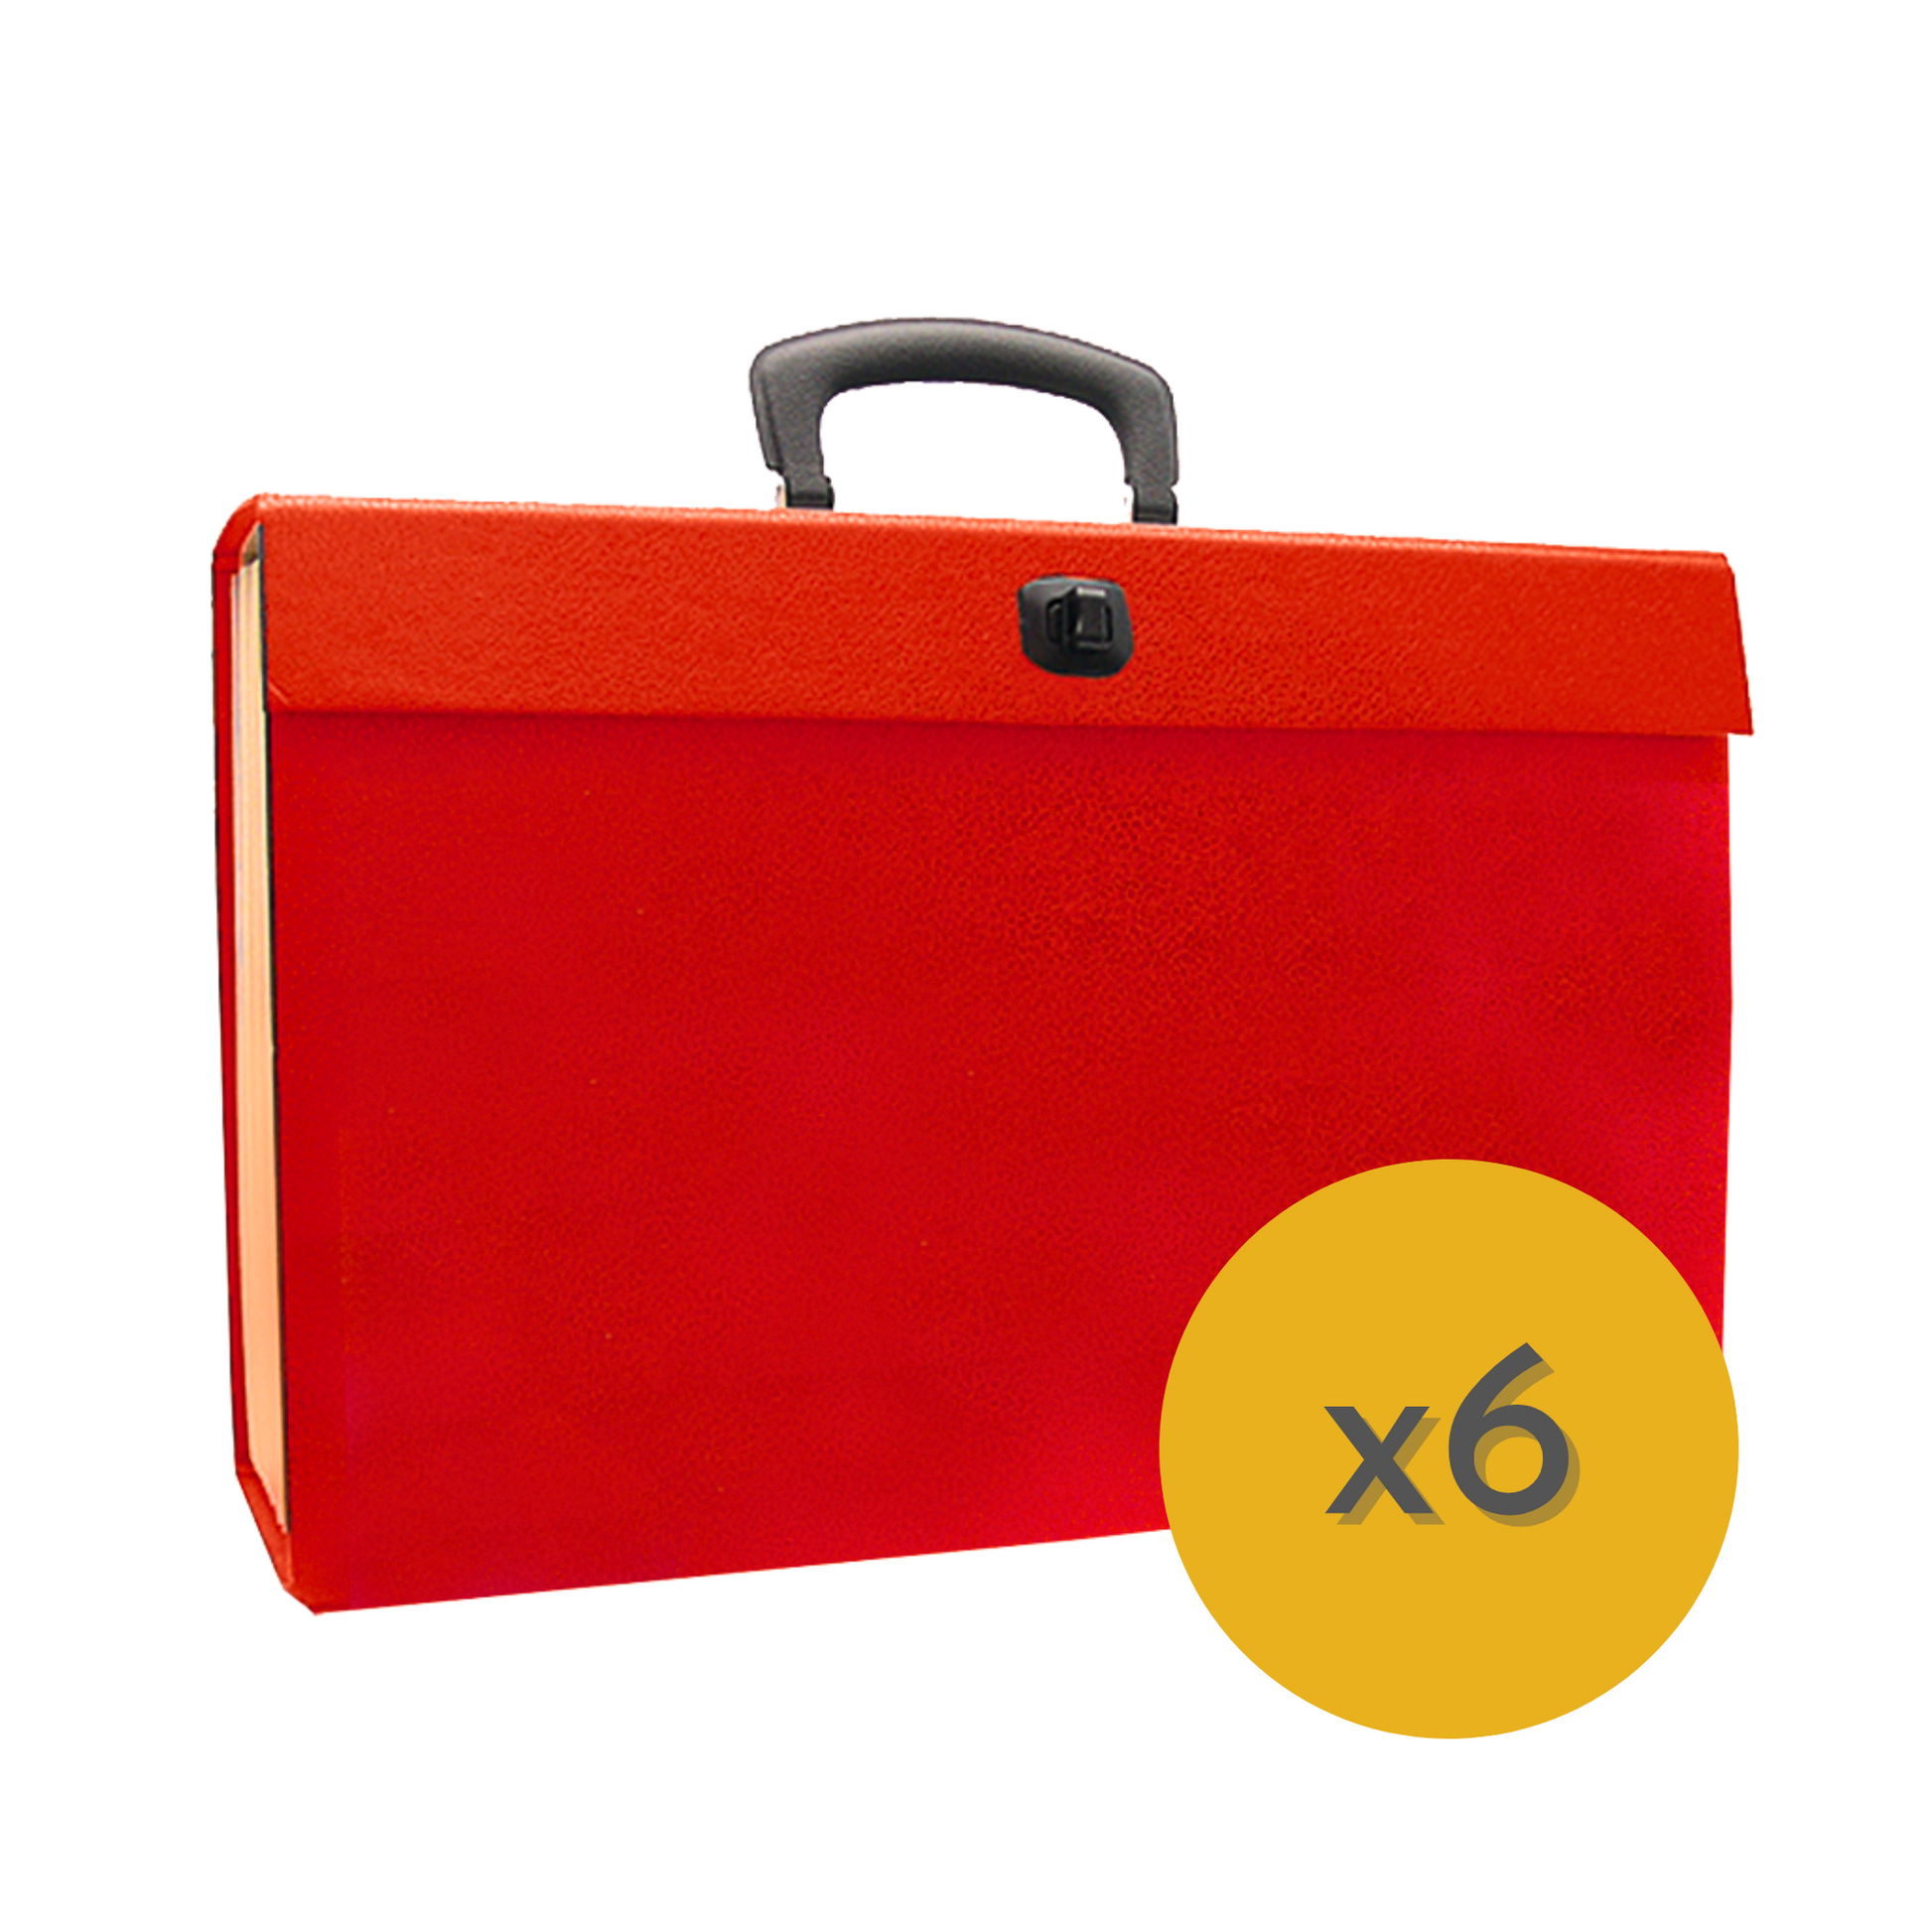 The image displays a red, textured expanding file case with a handle and a clasp for secure closure. It's a portable filing solution typically used for organizing and transporting documents. A yellow circle with the inscription "x6" shows that this product is available as part of a pack of six, indicating a bulk purchase or a package deal. The design suggests practicality and convenience for users needing to carry and access their files on the go.